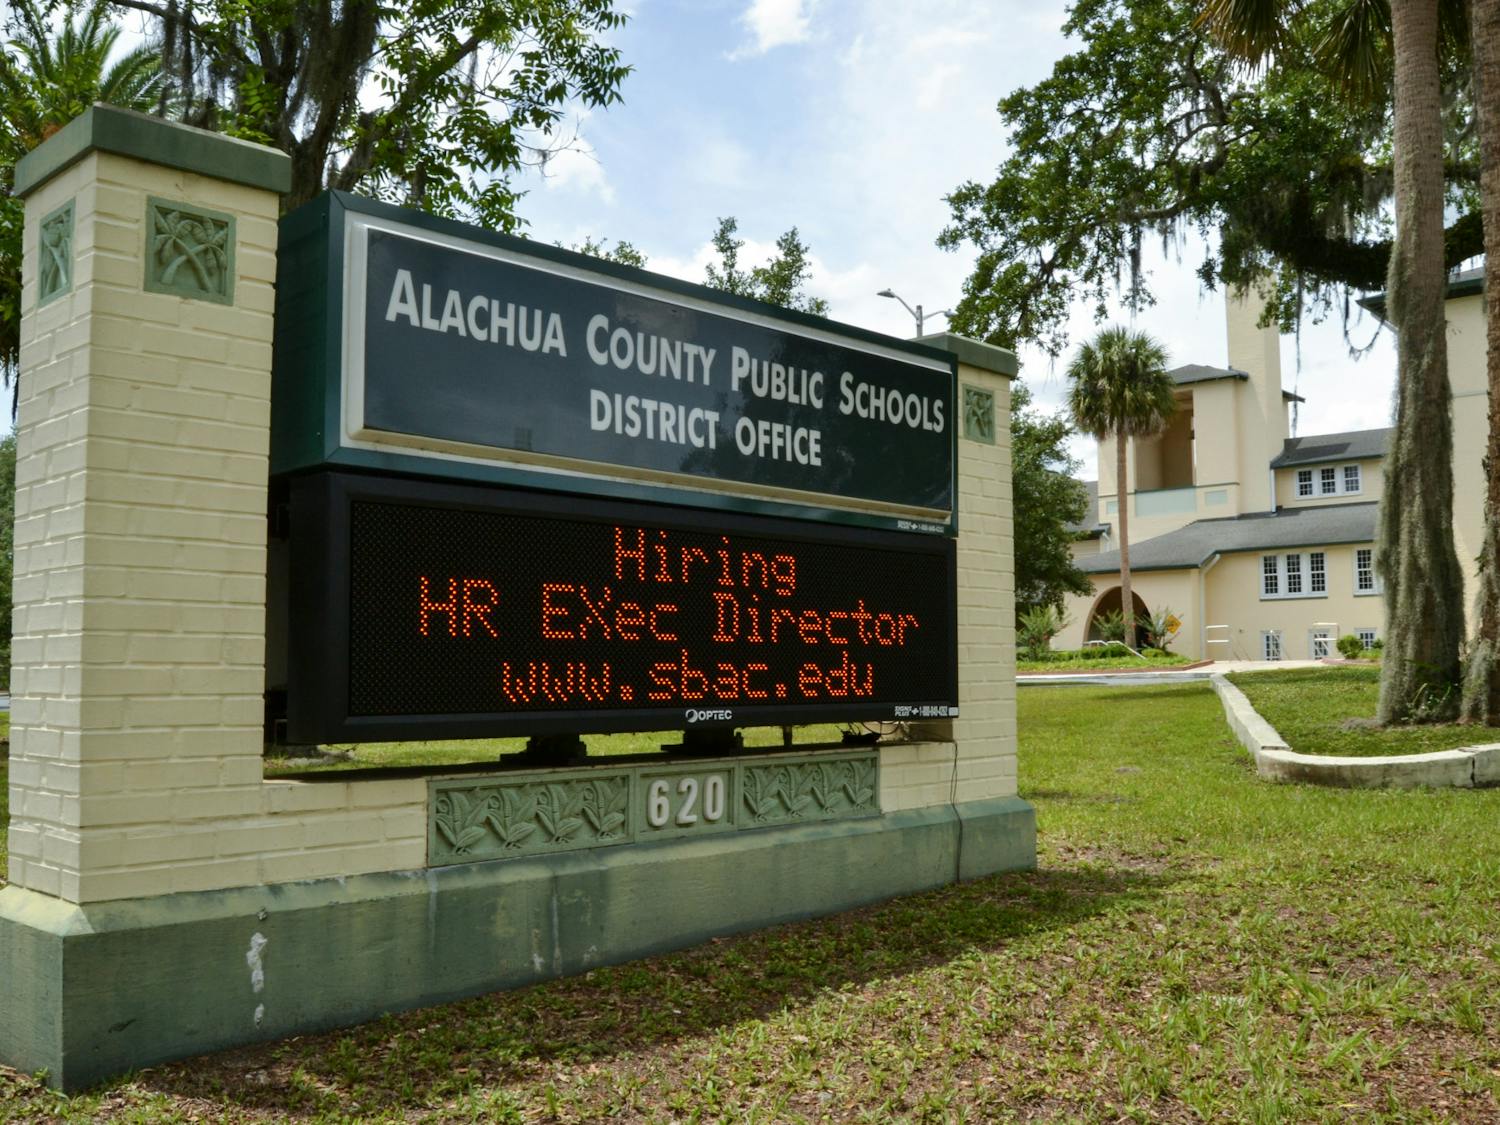 A digital sign in front of the Alachua County Public Schools district office building reads “Hiring HR Exec Director” on Sunday, June 6, 2021.